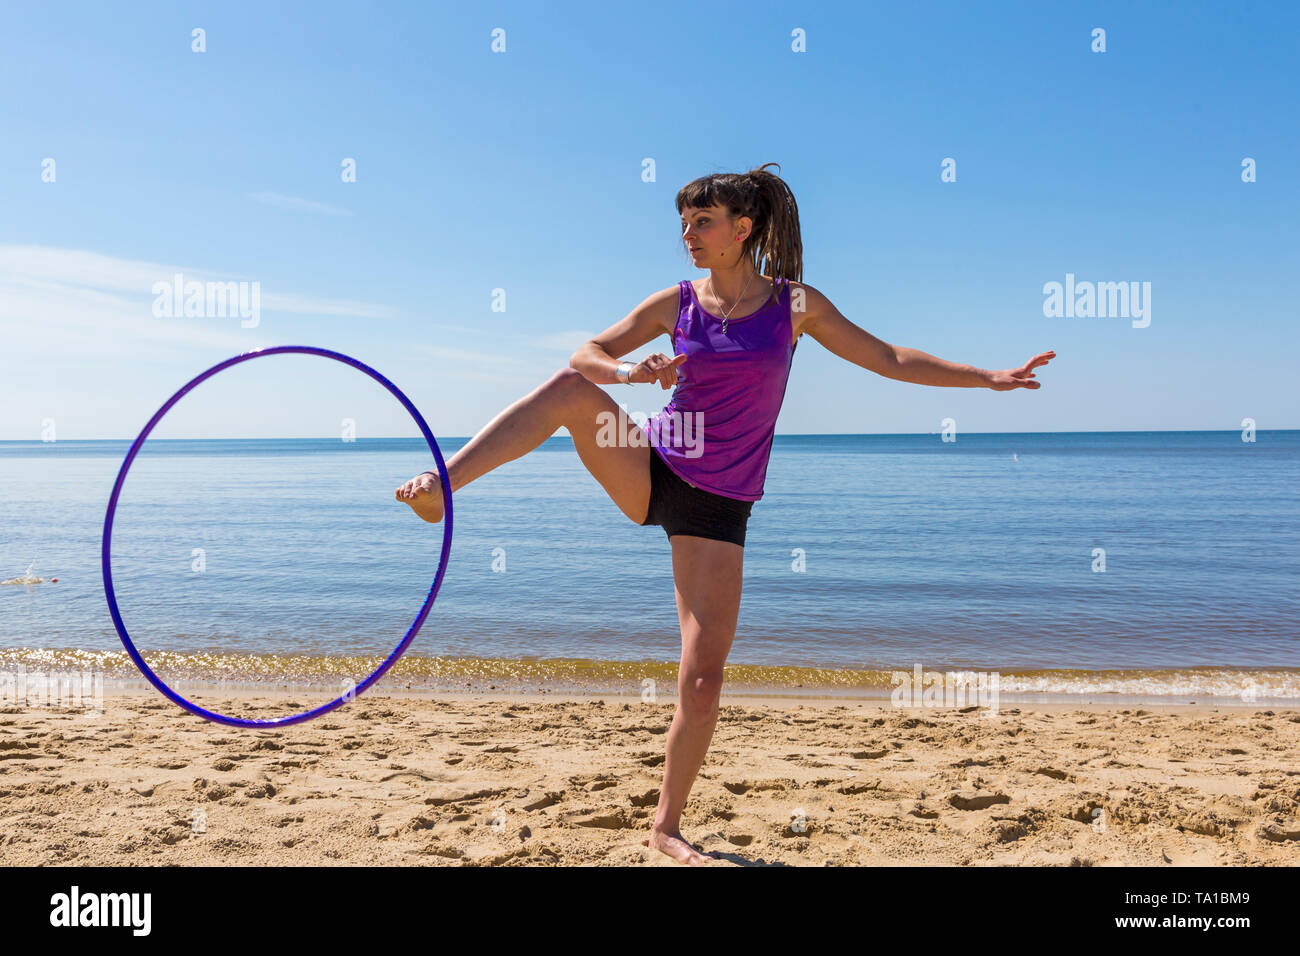 Southbourne, Bournemouth, Dorset, UK. 21st May 2019. UK weather: lovely warm sunny morning as Lottie Lucid performs her hula hooping routine on the beach at Southbourne, enjoying the warm sunny weather in her hot pants. Credit: Carolyn Jenkins/Alamy Live News Stock Photo